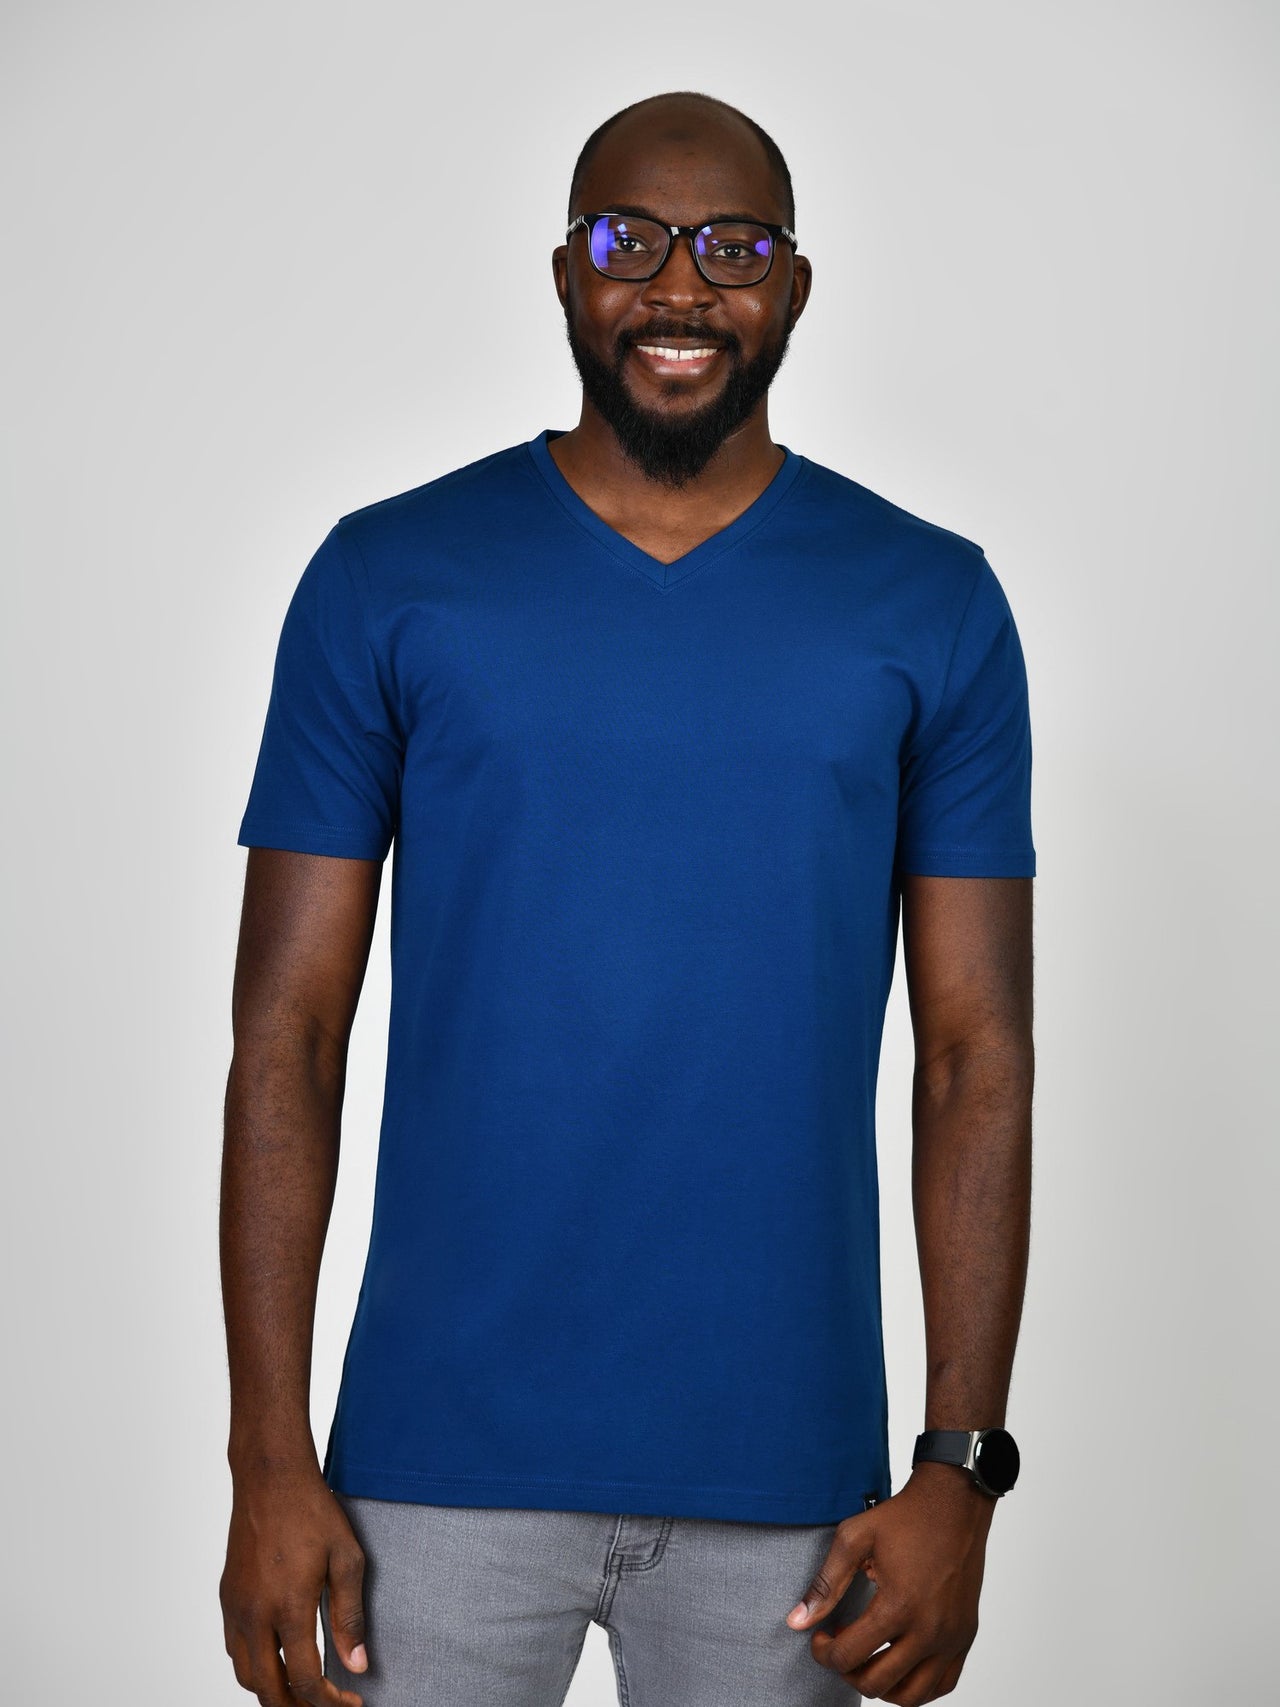 A tall and slim guy smiling in the studio and wearing a navy blue L tall slim v-neck t-shirt.